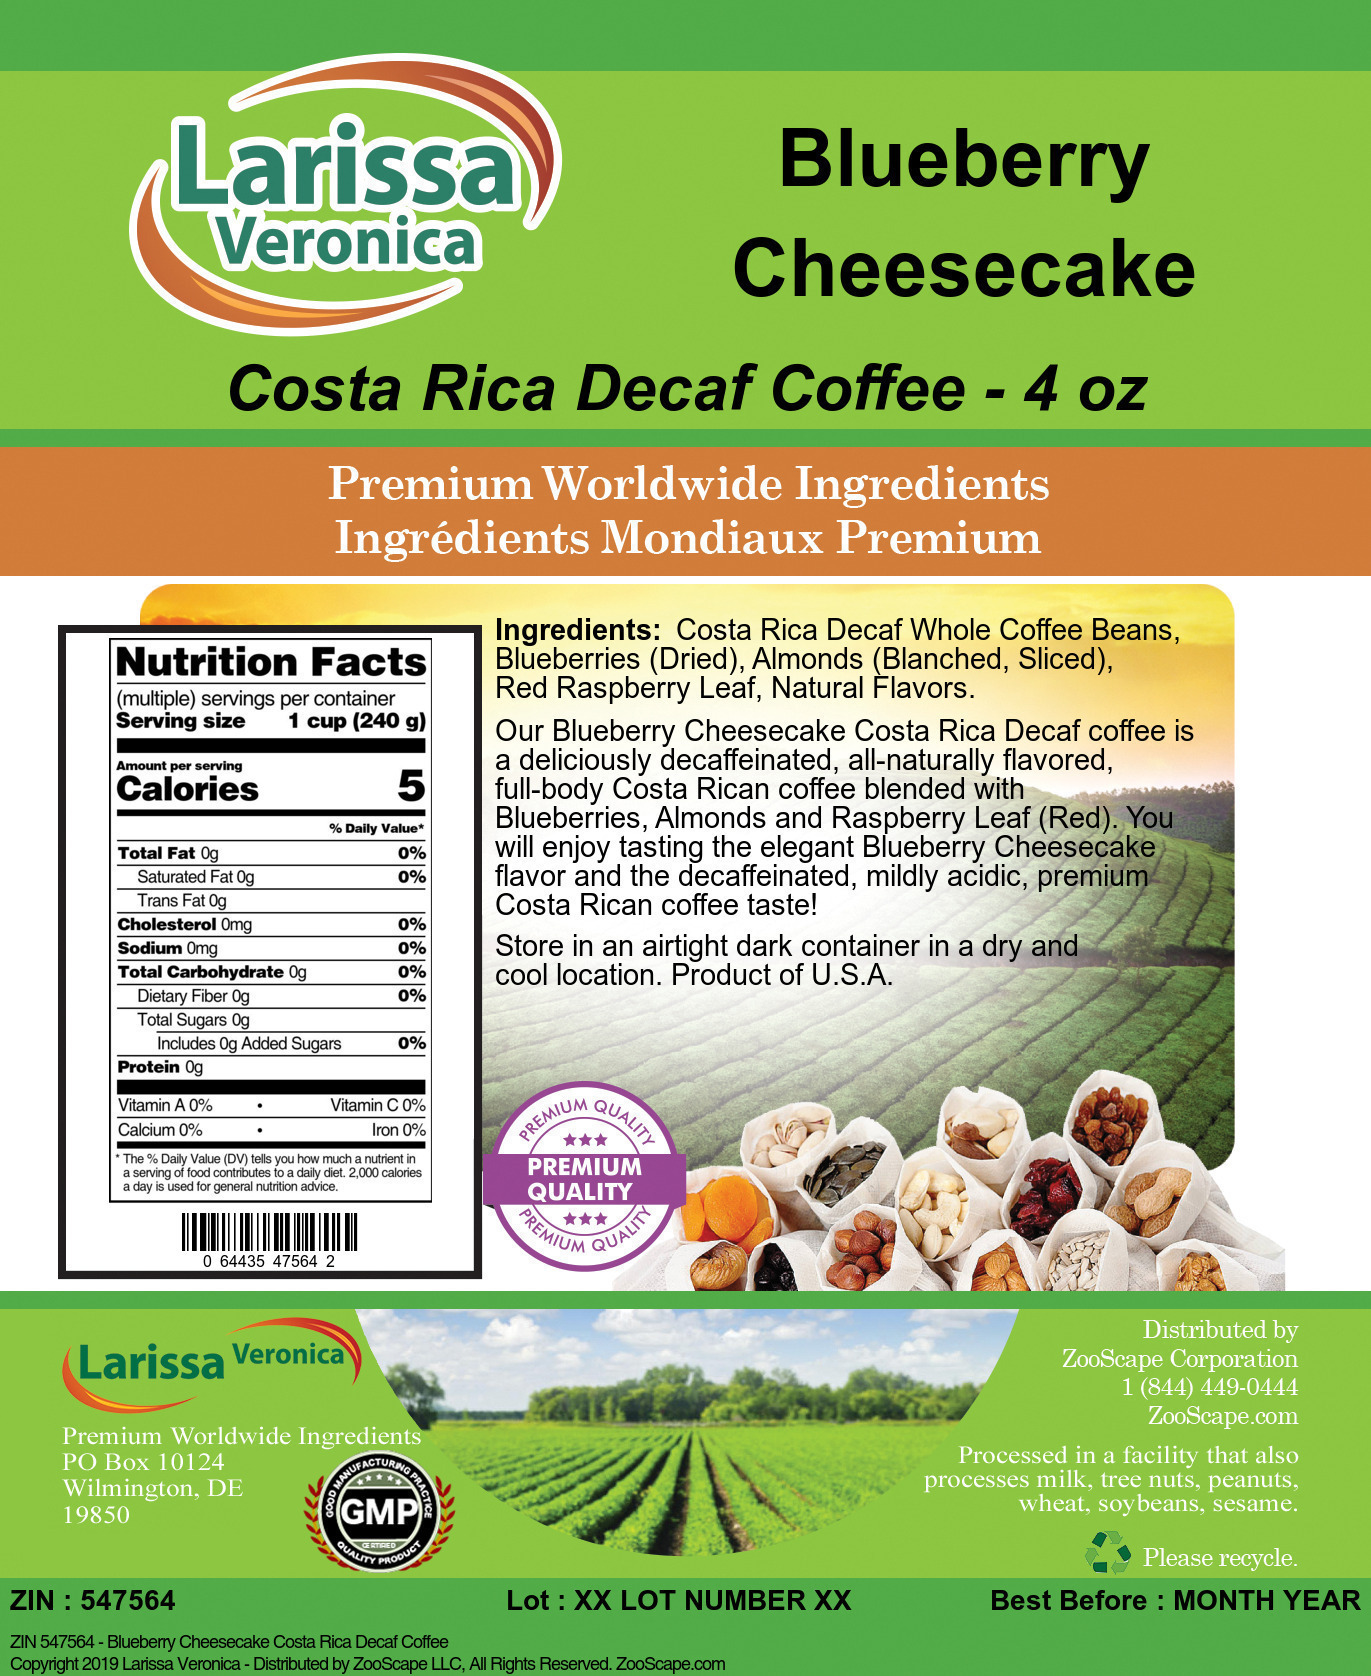 Blueberry Cheesecake Costa Rica Decaf Coffee - Label